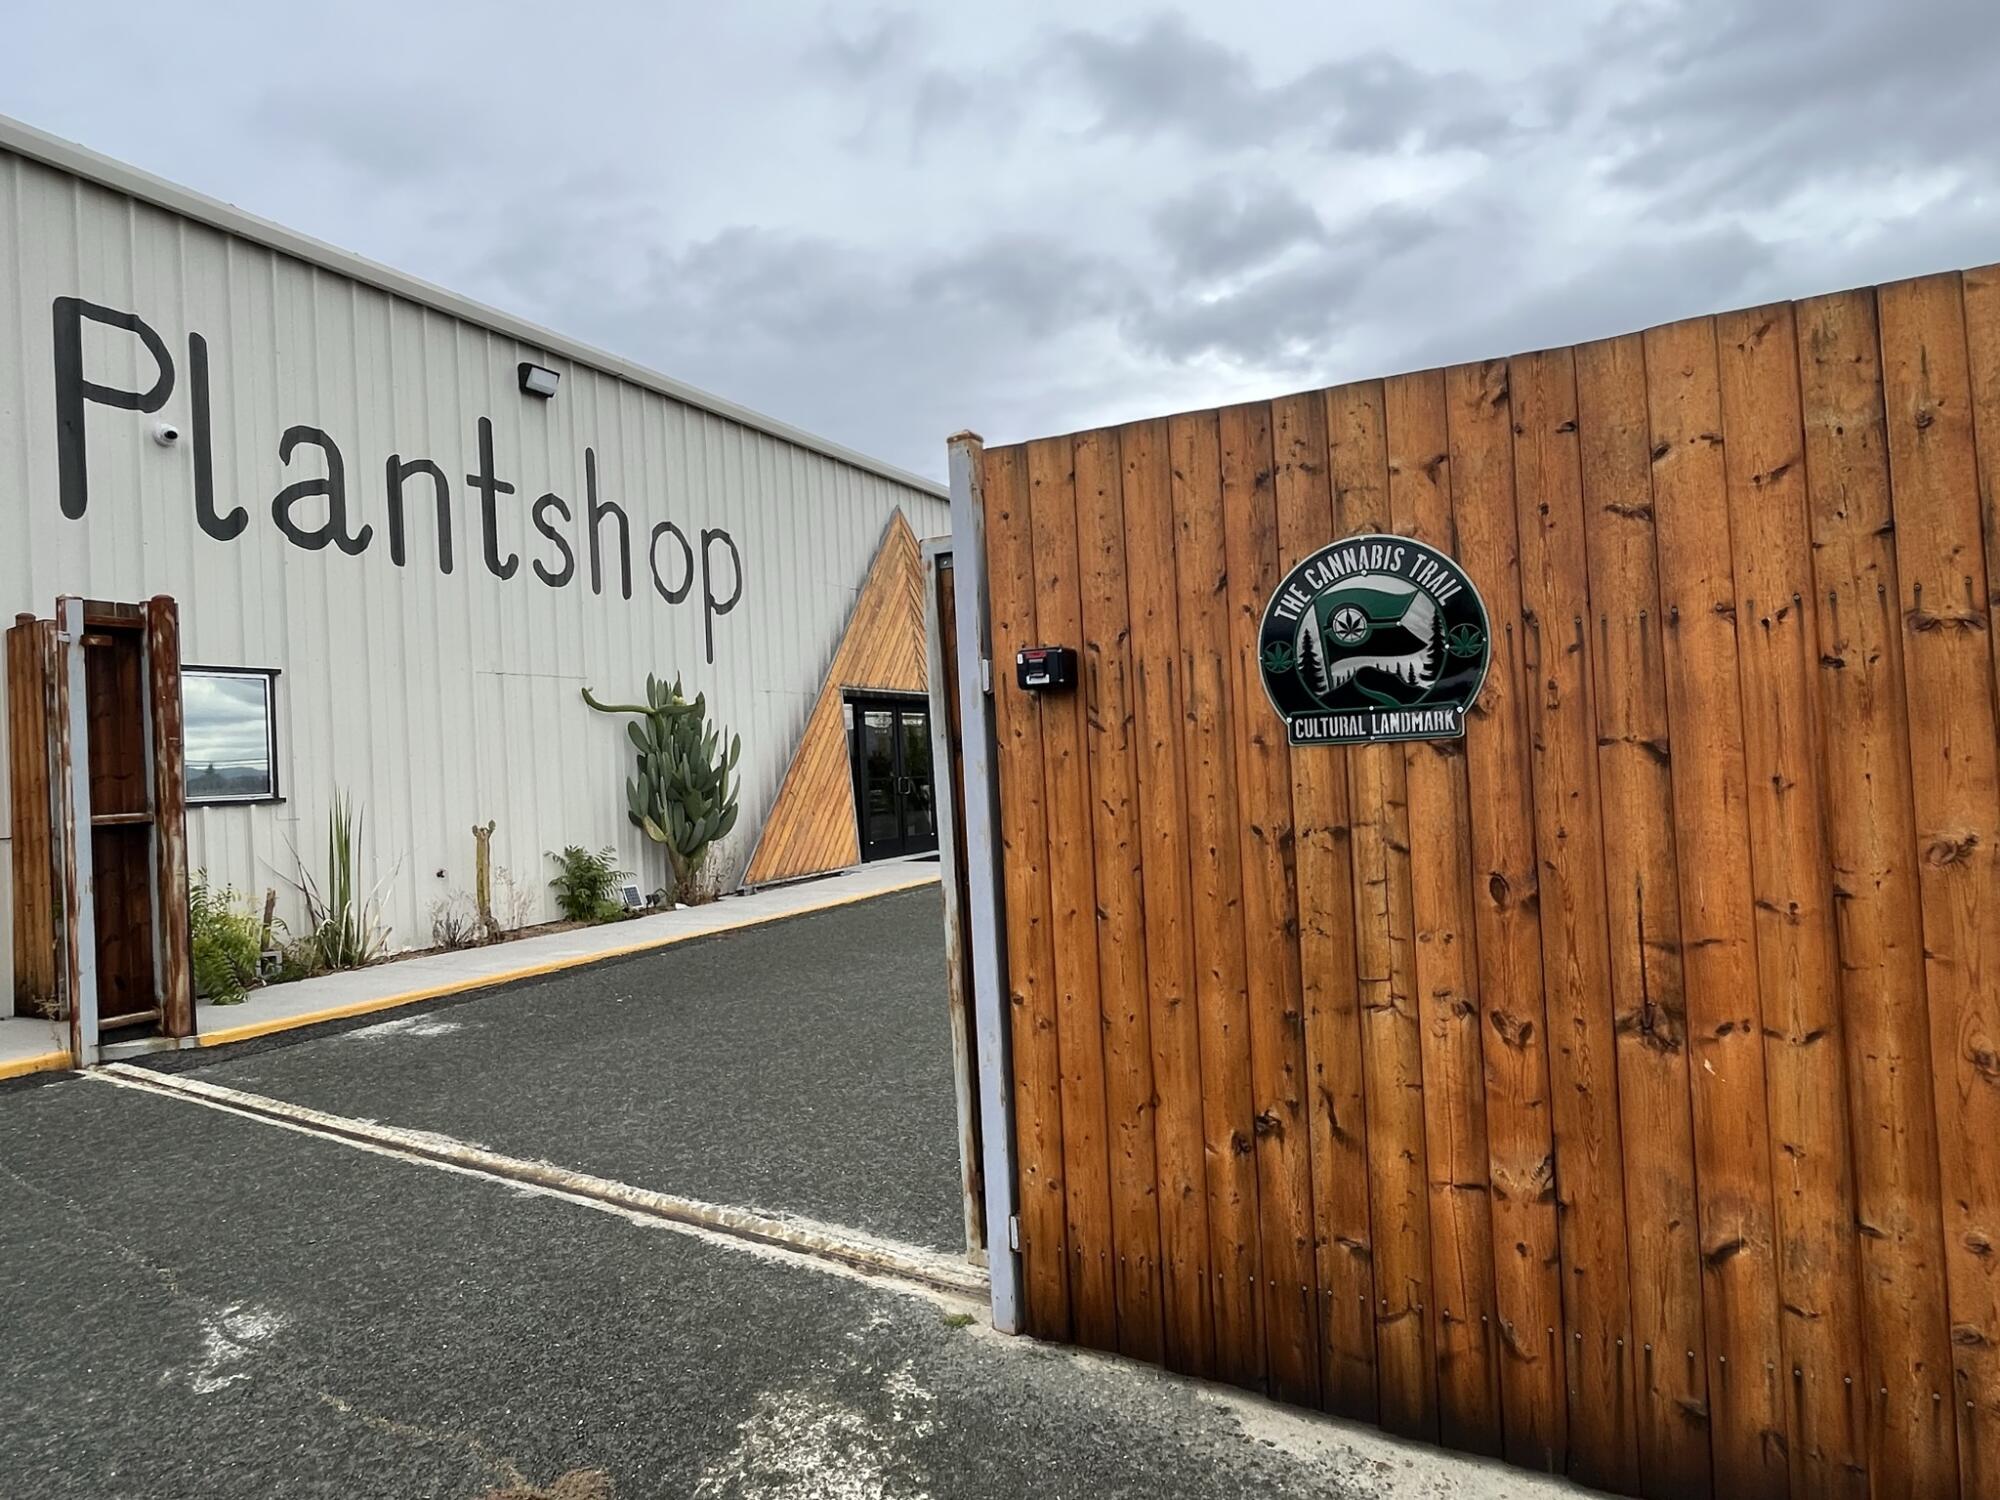 A building with the word Plantshop next to a wooden fence with a green and black plaque on it